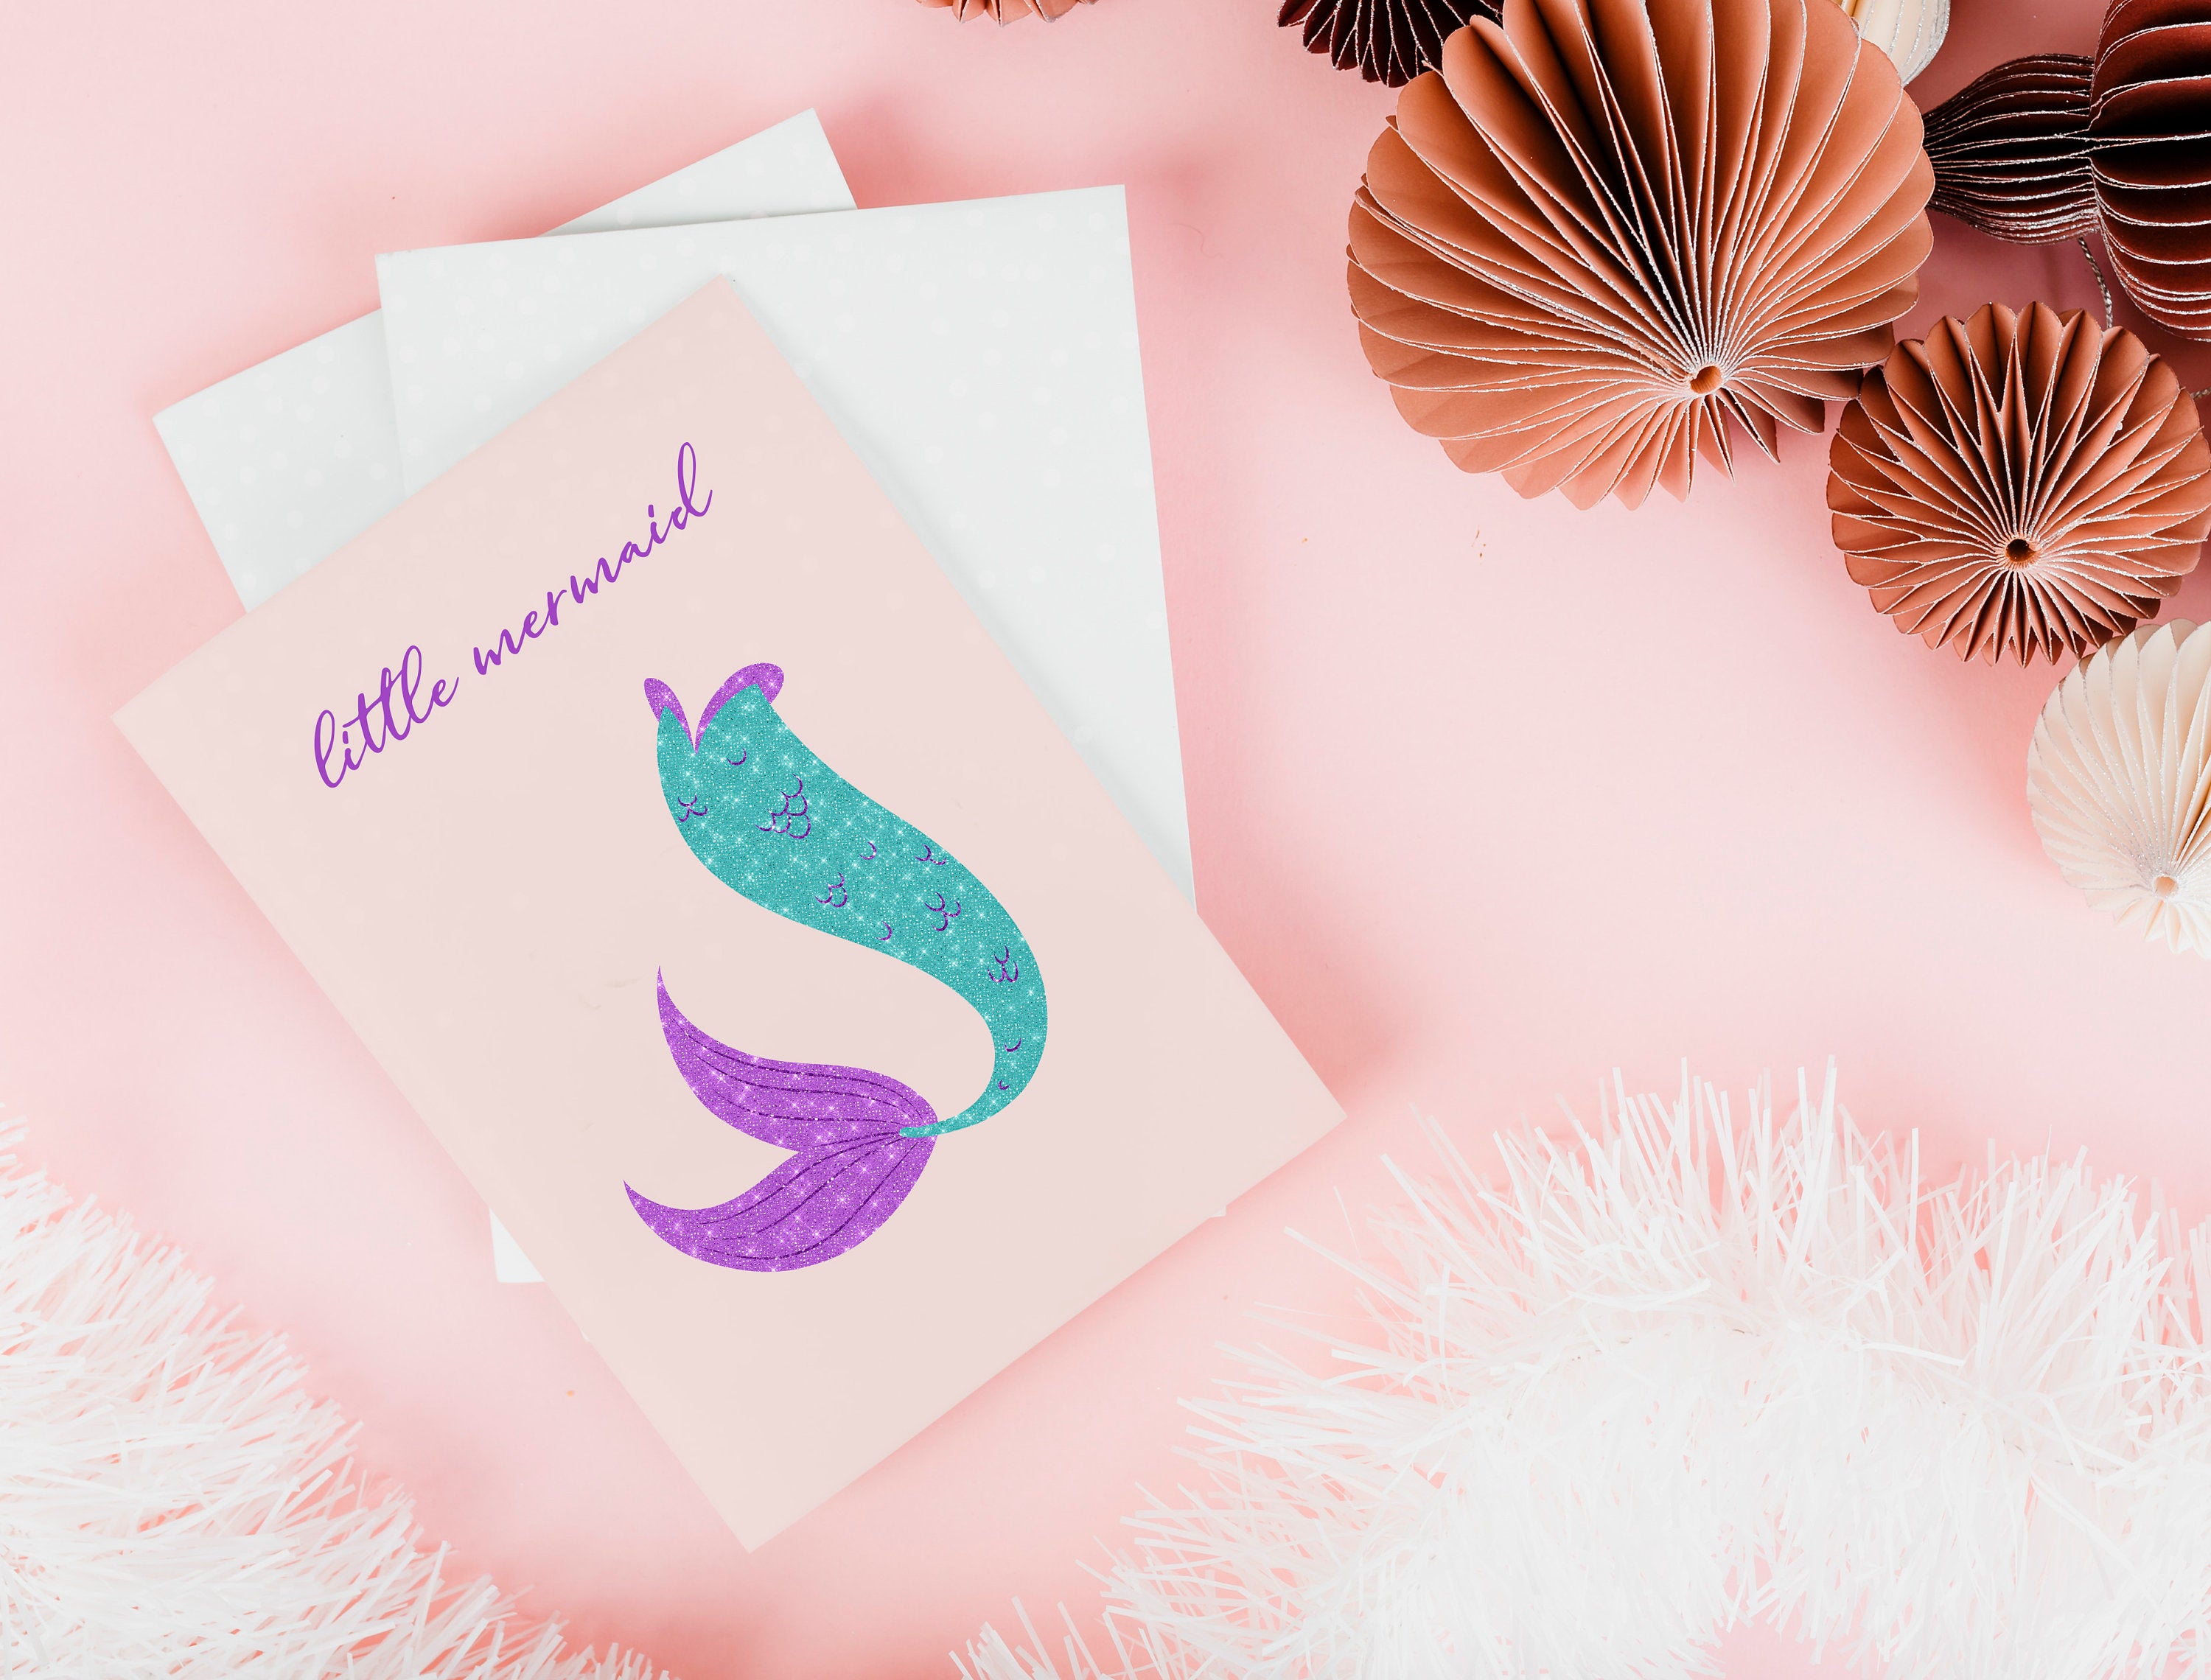 18 Glitter Mermaid Tails Overlay Images 300 Dpi PNG Instant Download Commercial Use Baby Shower Magical Fairy Story Little Mermaid Princess